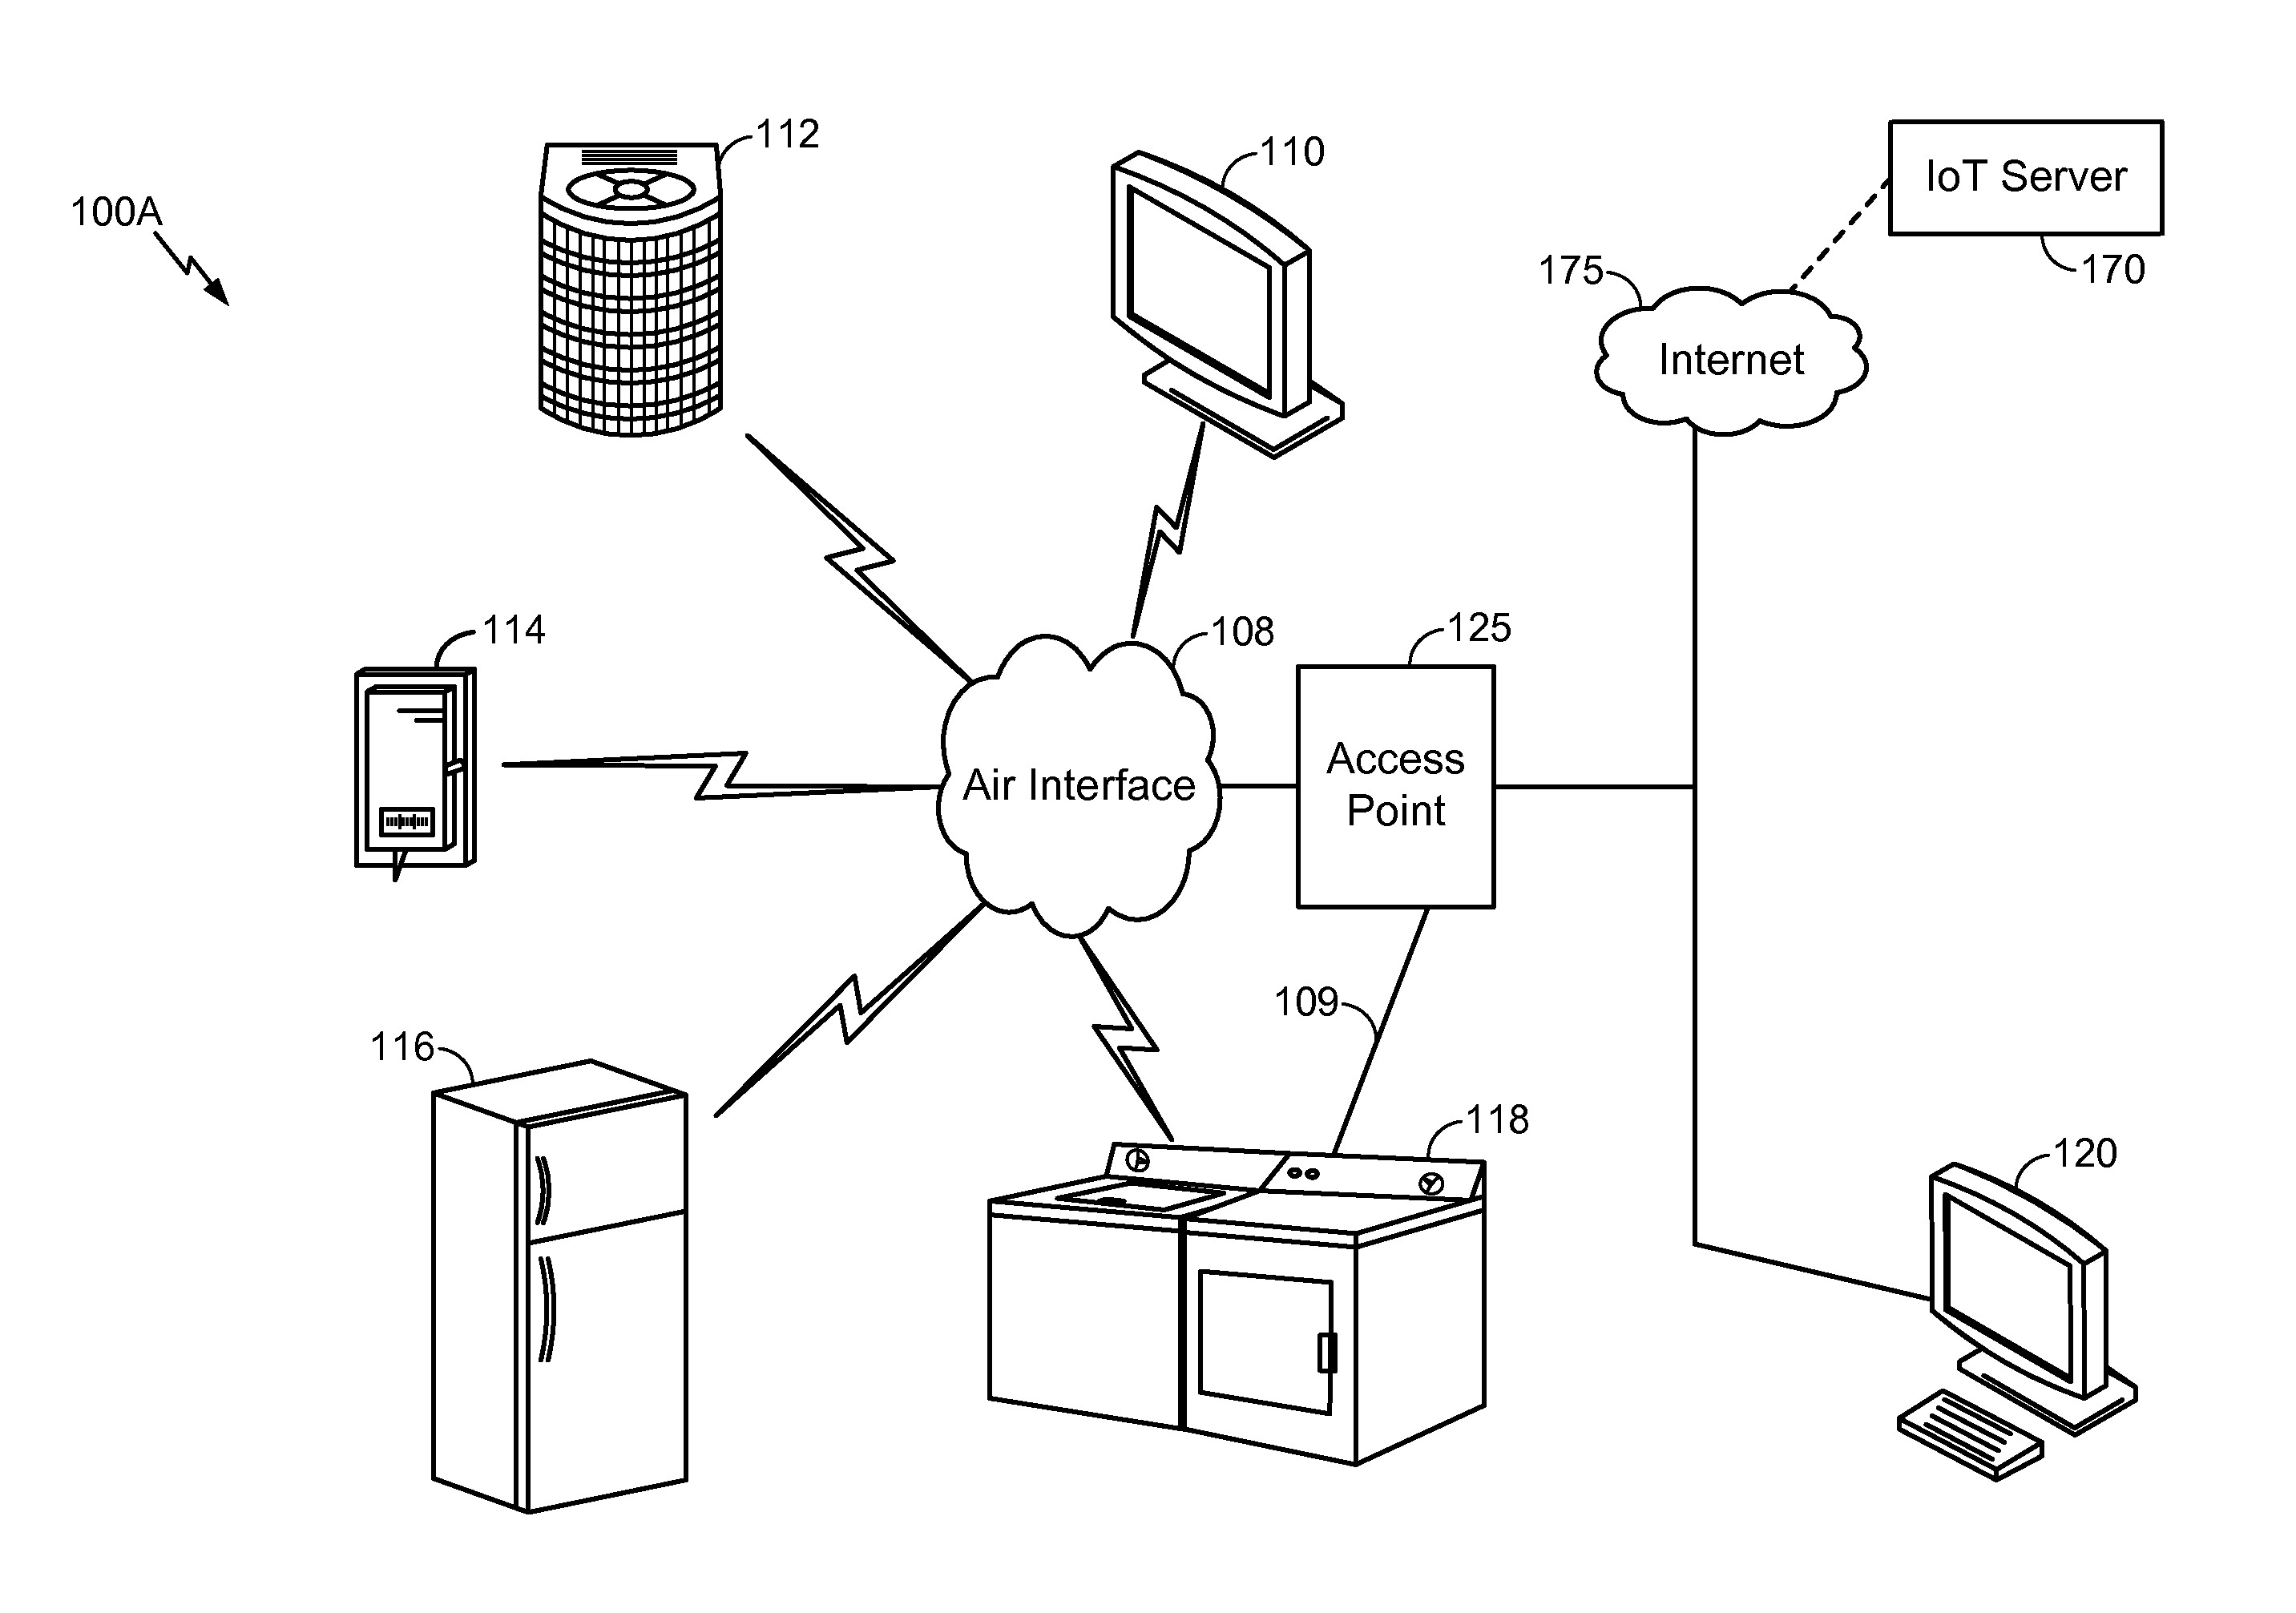 Identifying IoT devices/objects/people using out-of-band signaling/metadata in conjunction with optical images